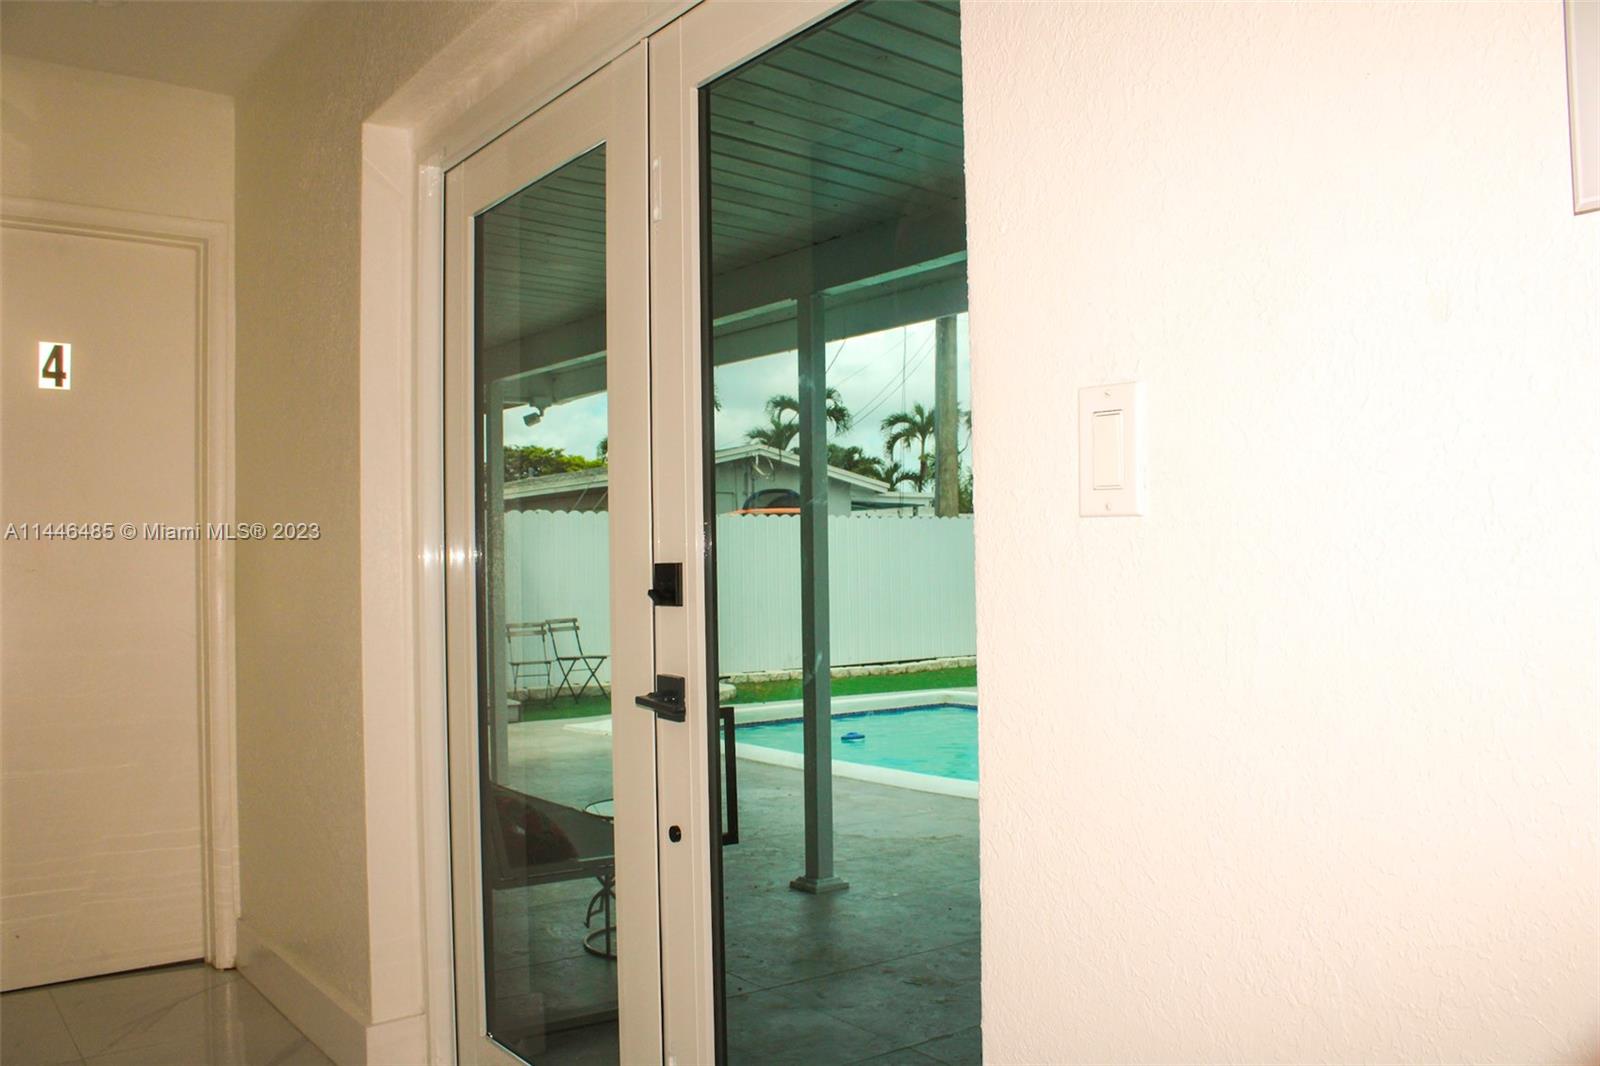 Residential, Hollywood, Florida image 50